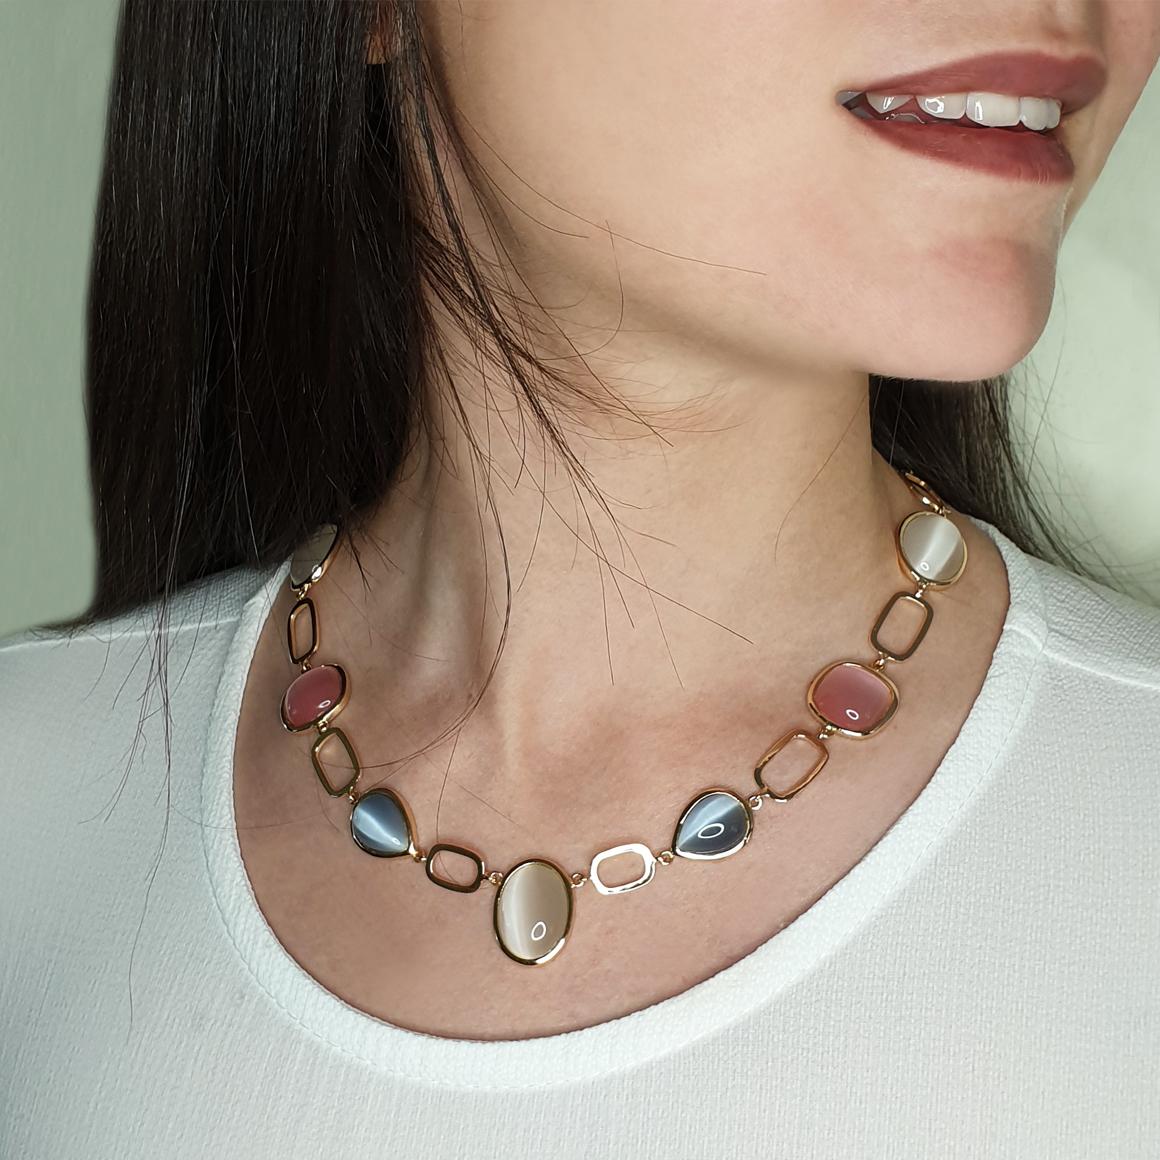  Combination of shapes and colors made a unique fashion and modern necklace  in 18k rose gold with colored stones. Made in Italy by Stanoppi Jewellery since 1948.
Stones : drops mm 10x14  oval mm 13x17  square mm 13x13     g.39.80   length cm